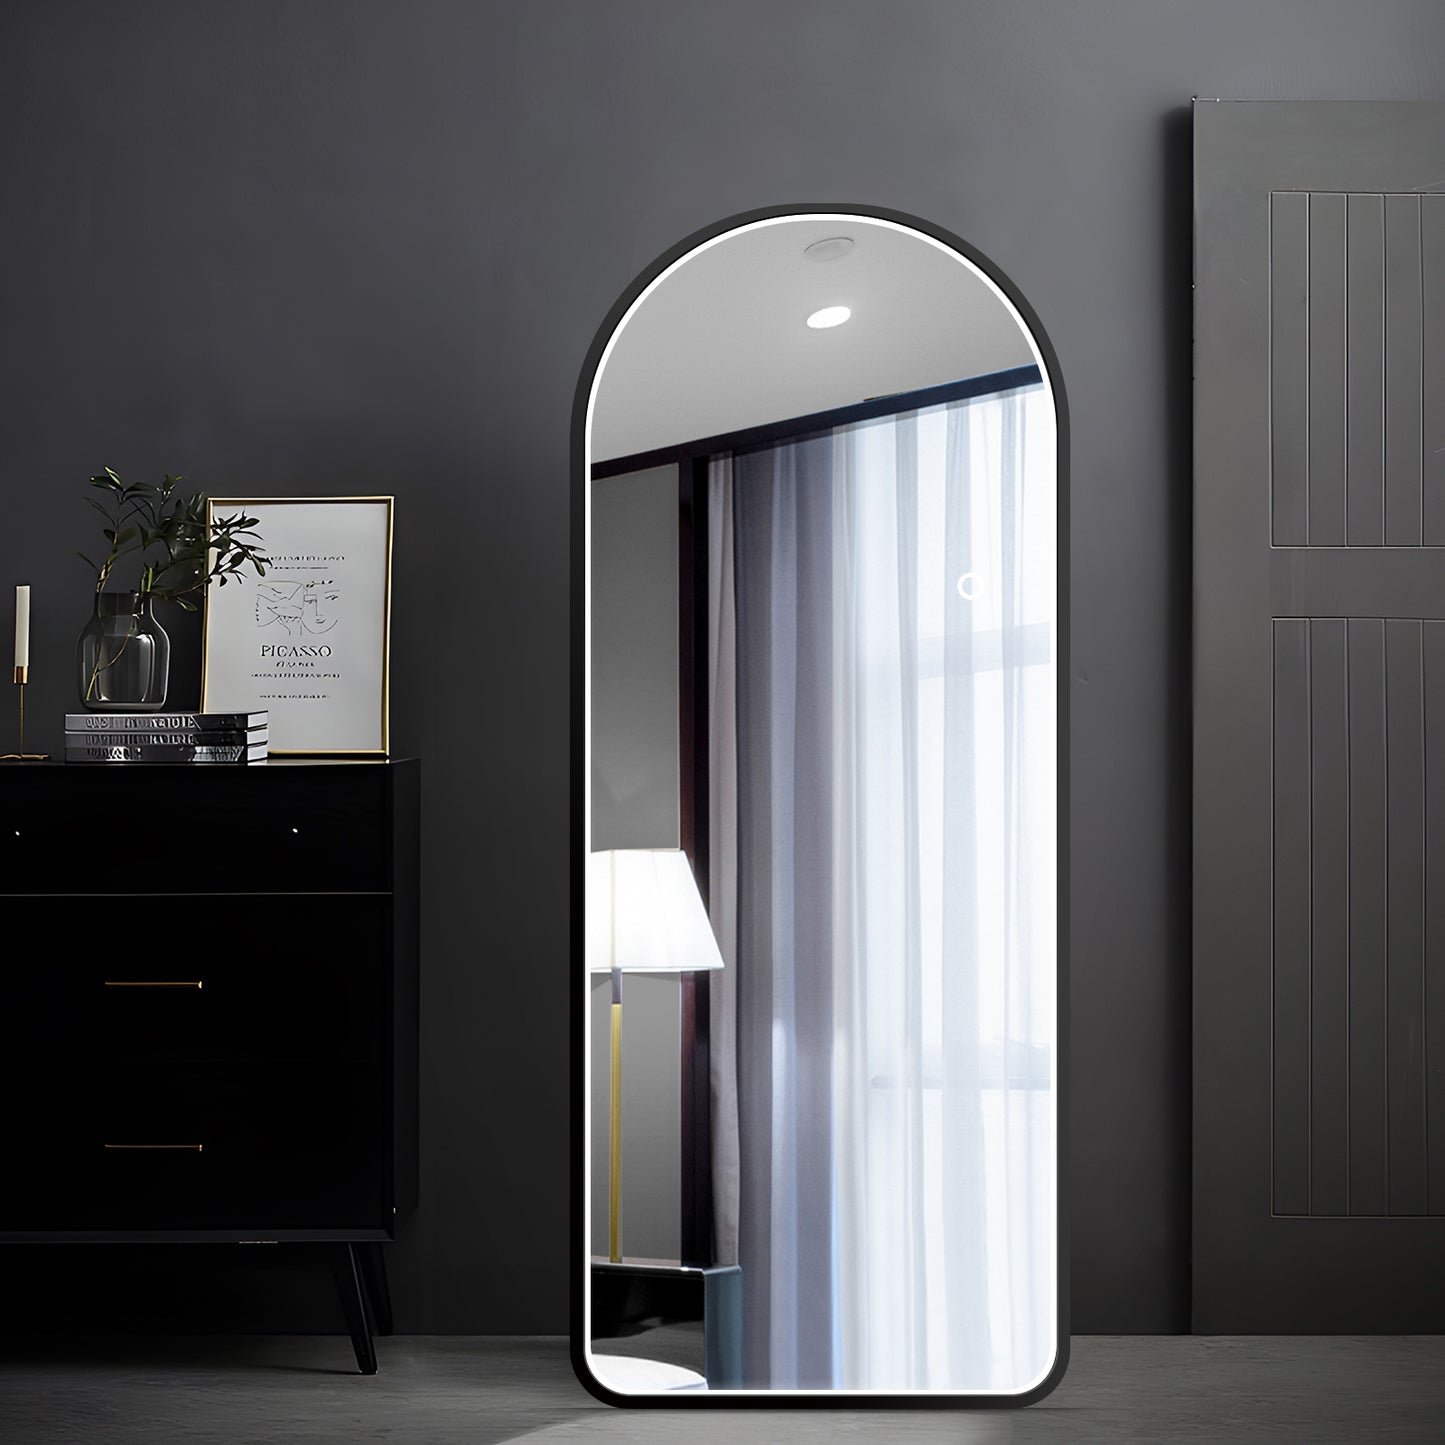 Soges Professional Full Length Mirror with Arched Design, LED Lights and Storage - Floor Standing Dressing Mirror Black